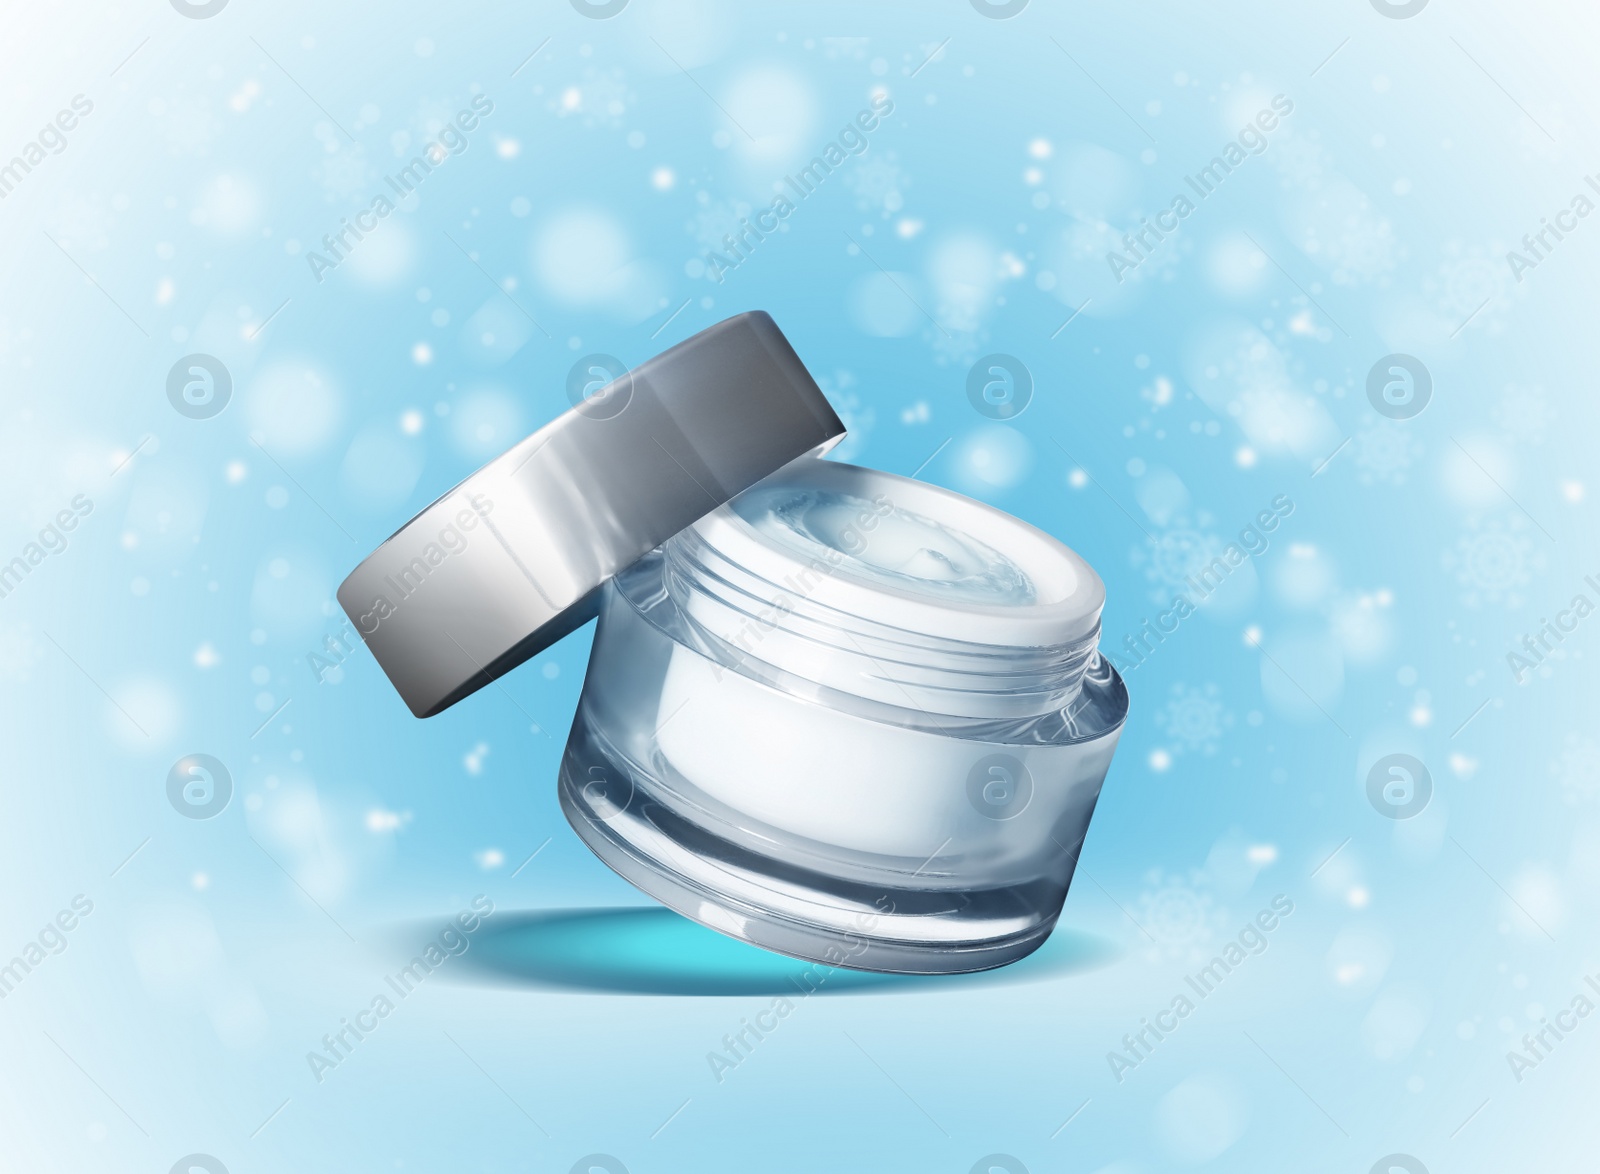 Image of Jar of cosmetic cream on light blue background with blurred snowflakes. Winter skin care